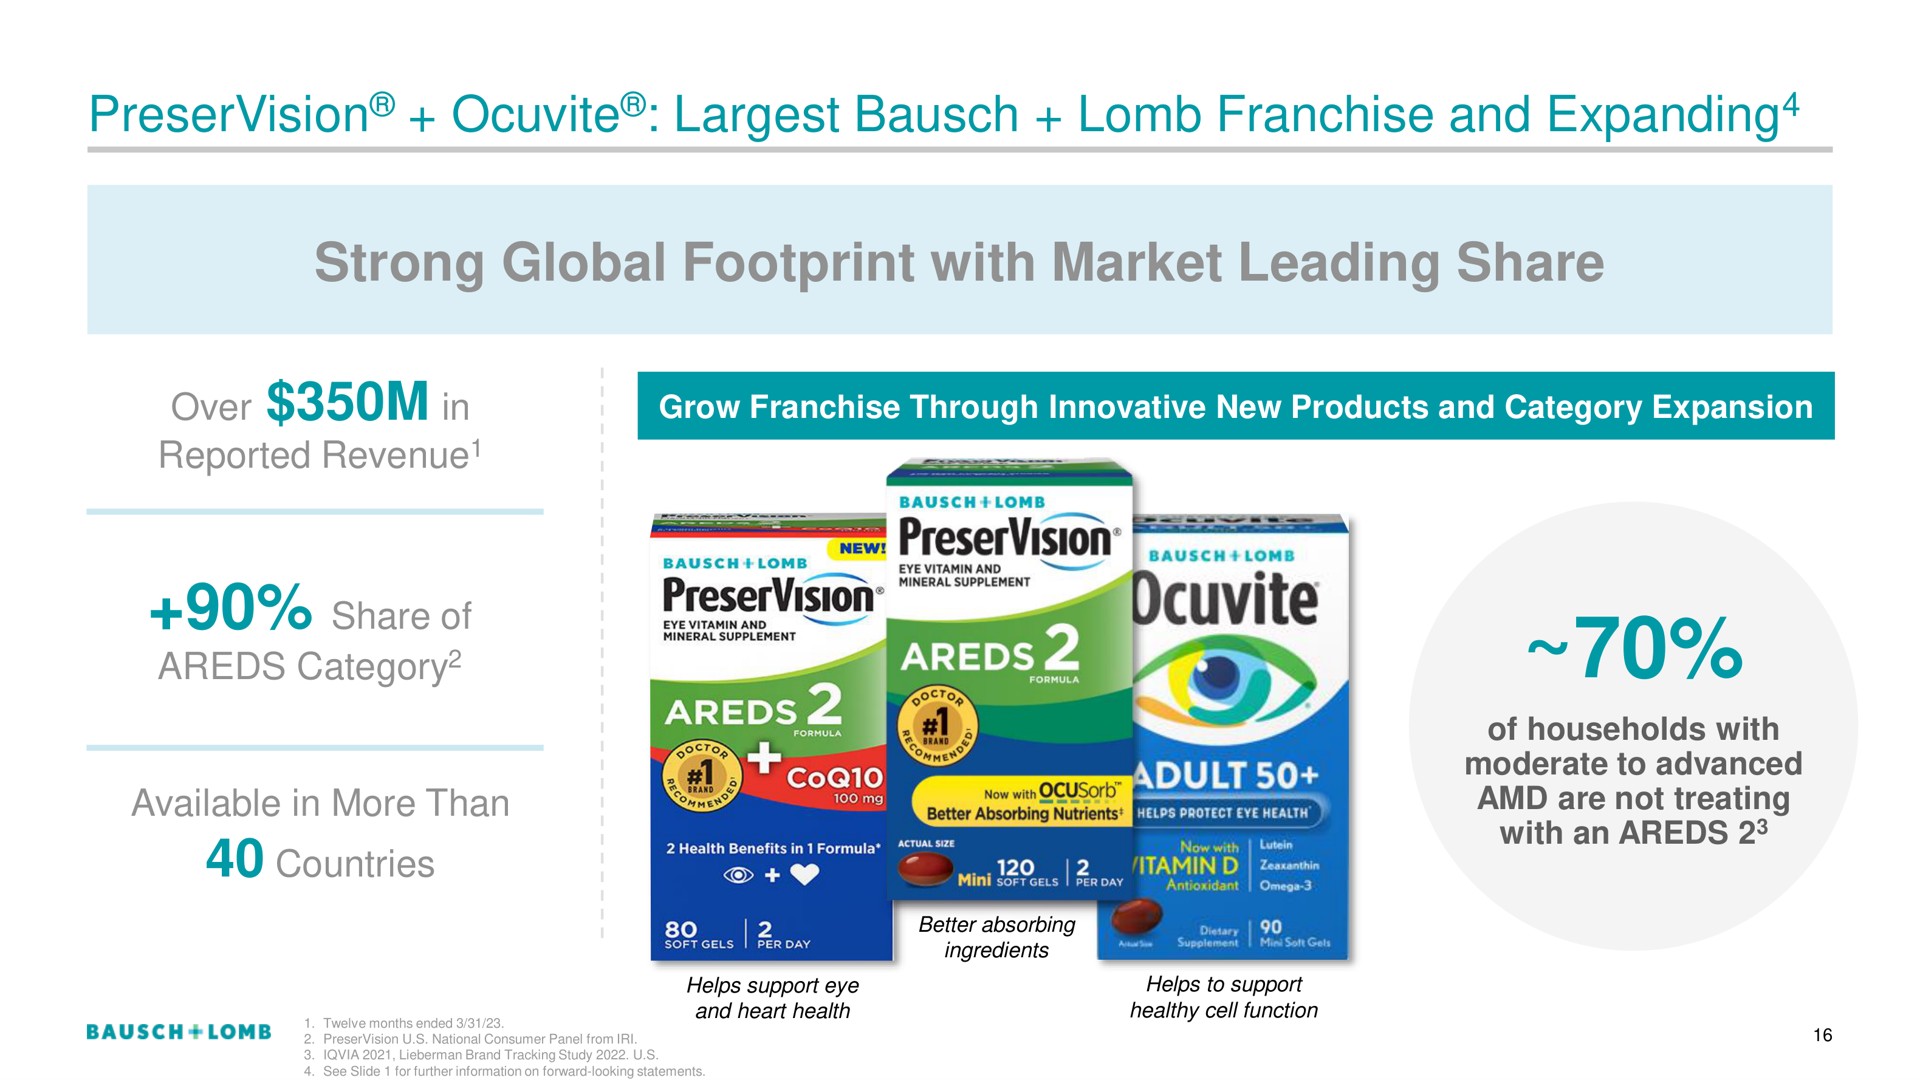 franchise and expanding strong global footprint with market leading share expanding | Bausch+Lomb